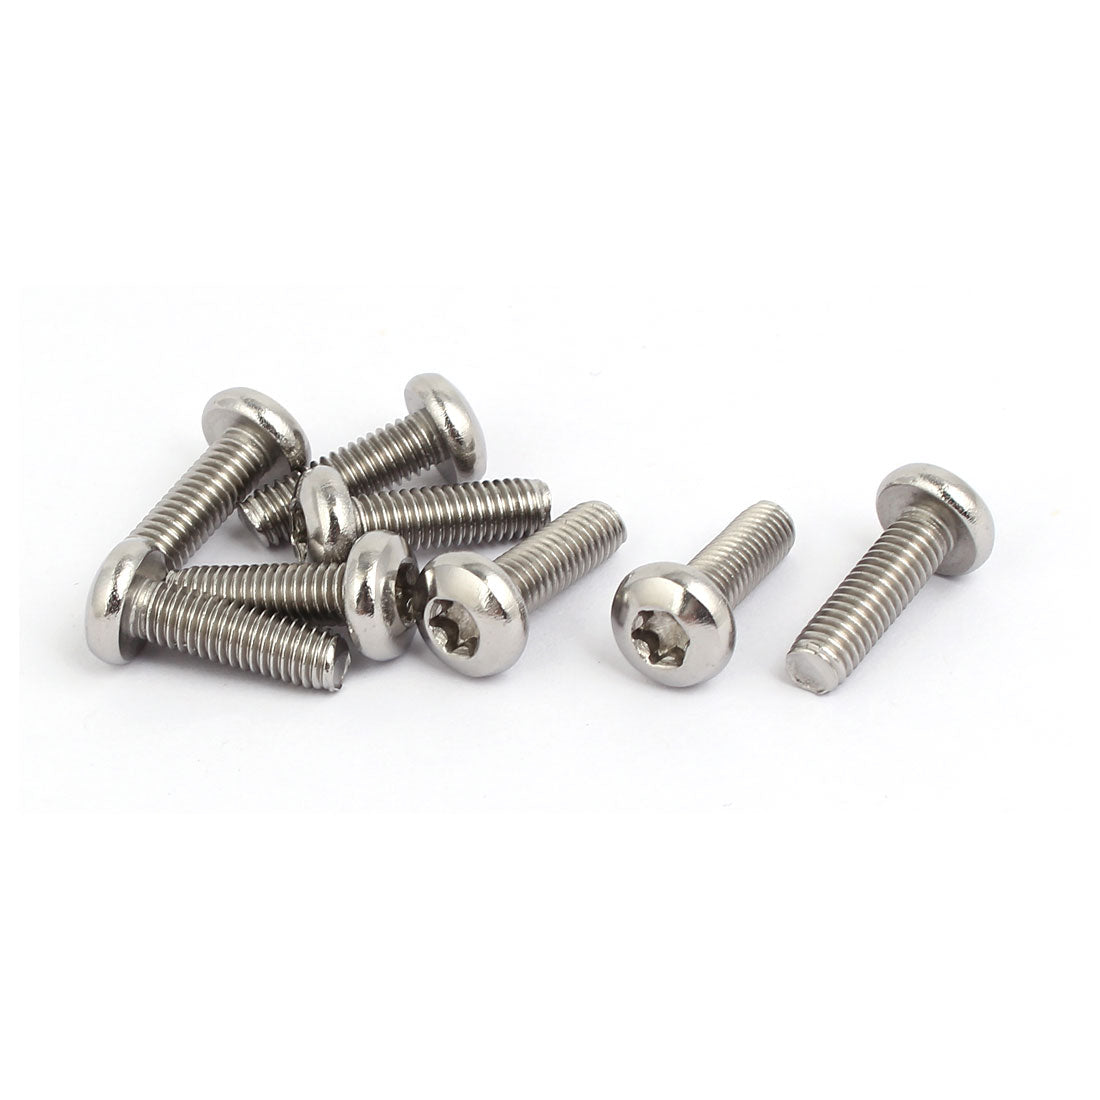 uxcell Uxcell M6x20mm 304 Stainless Steel Button Head Torx Socket Cap Screws Fasteners 8pcs